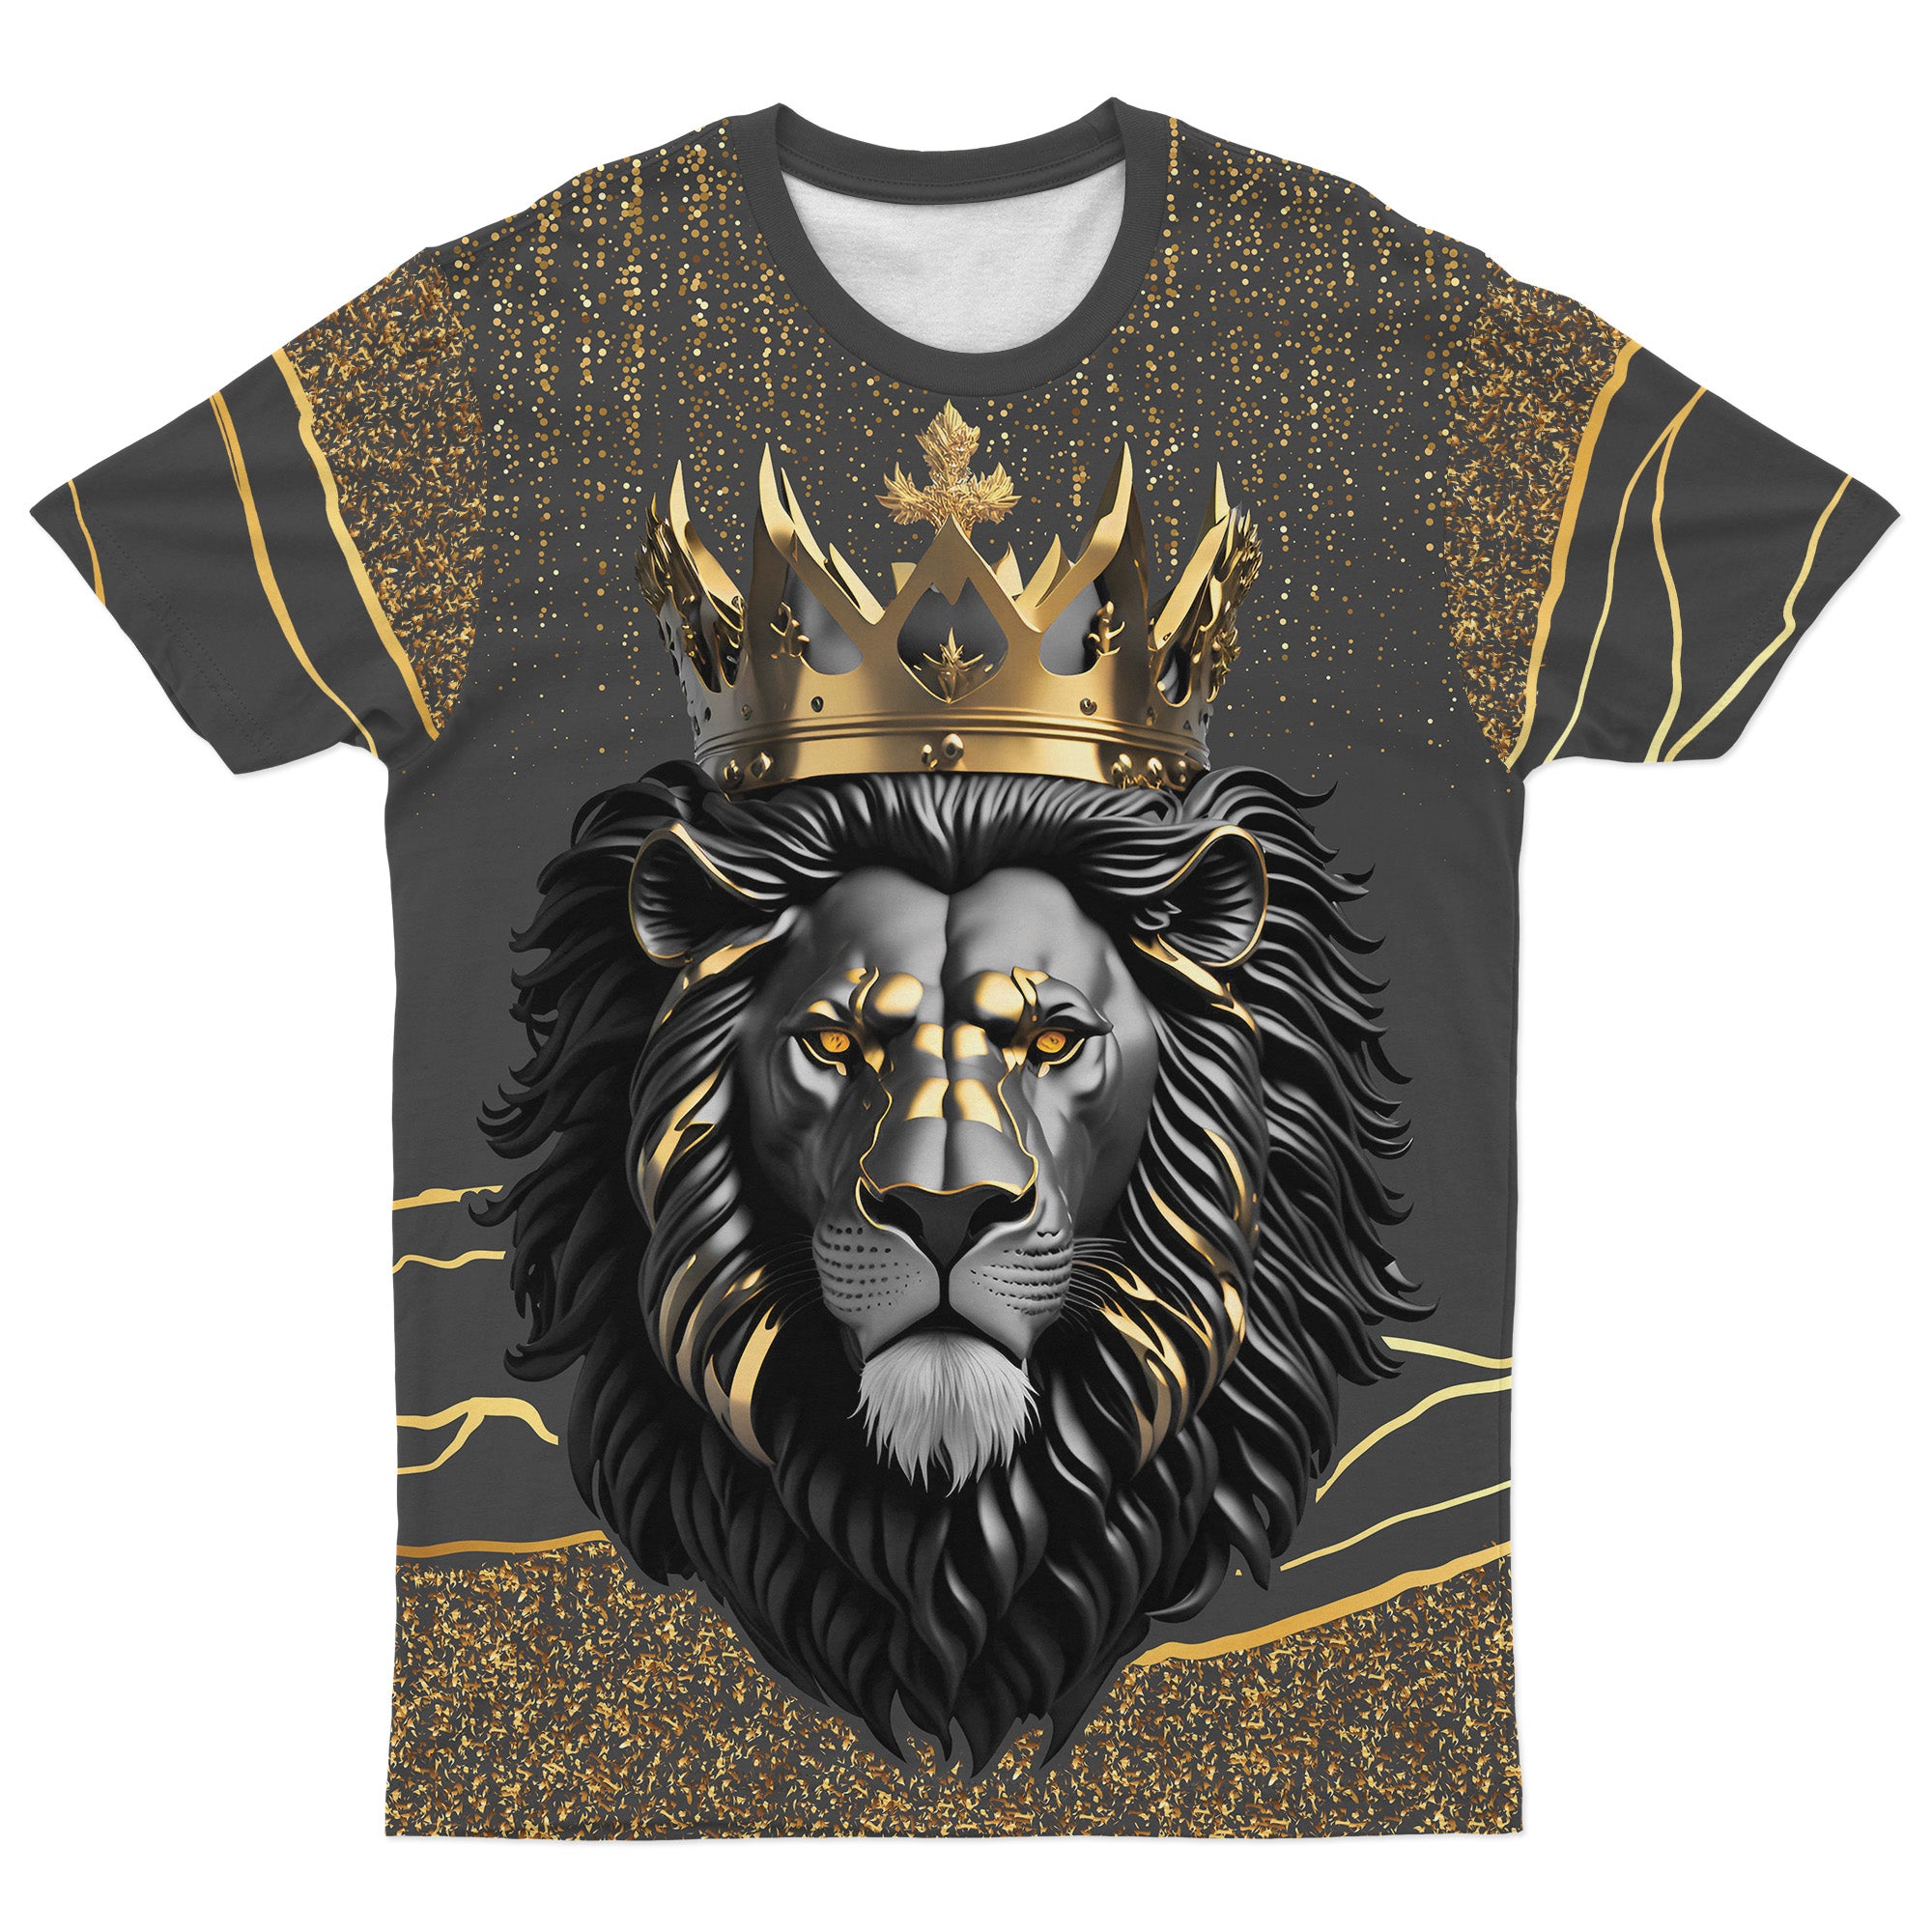 Black and Gold Lion T-shirt